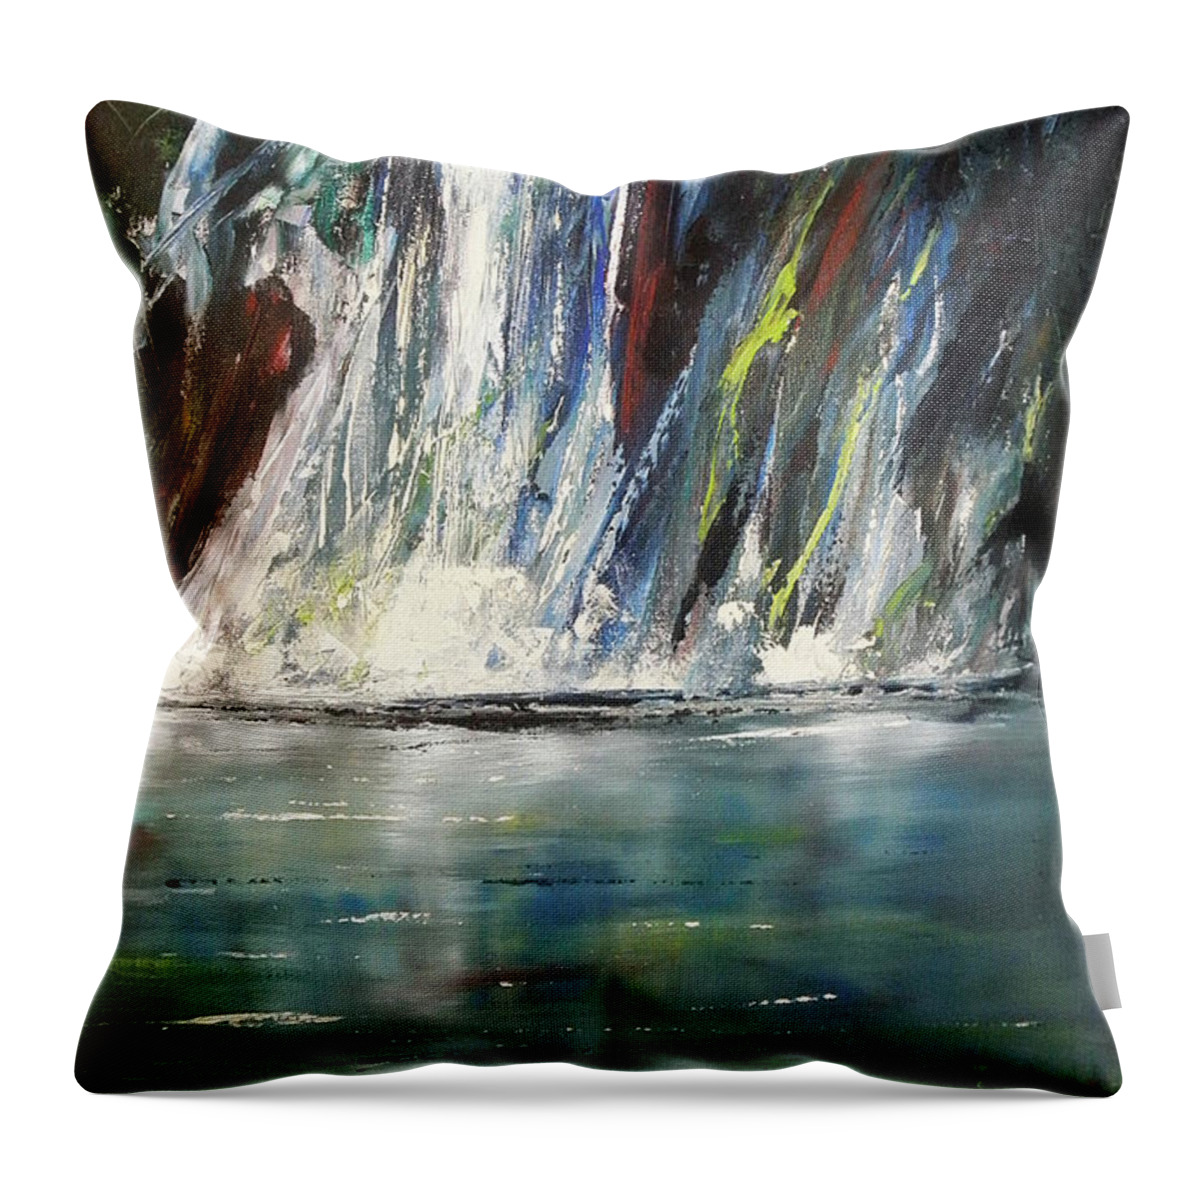 Waterfall Throw Pillow featuring the painting Waterfall 3 by Gina De Gorna